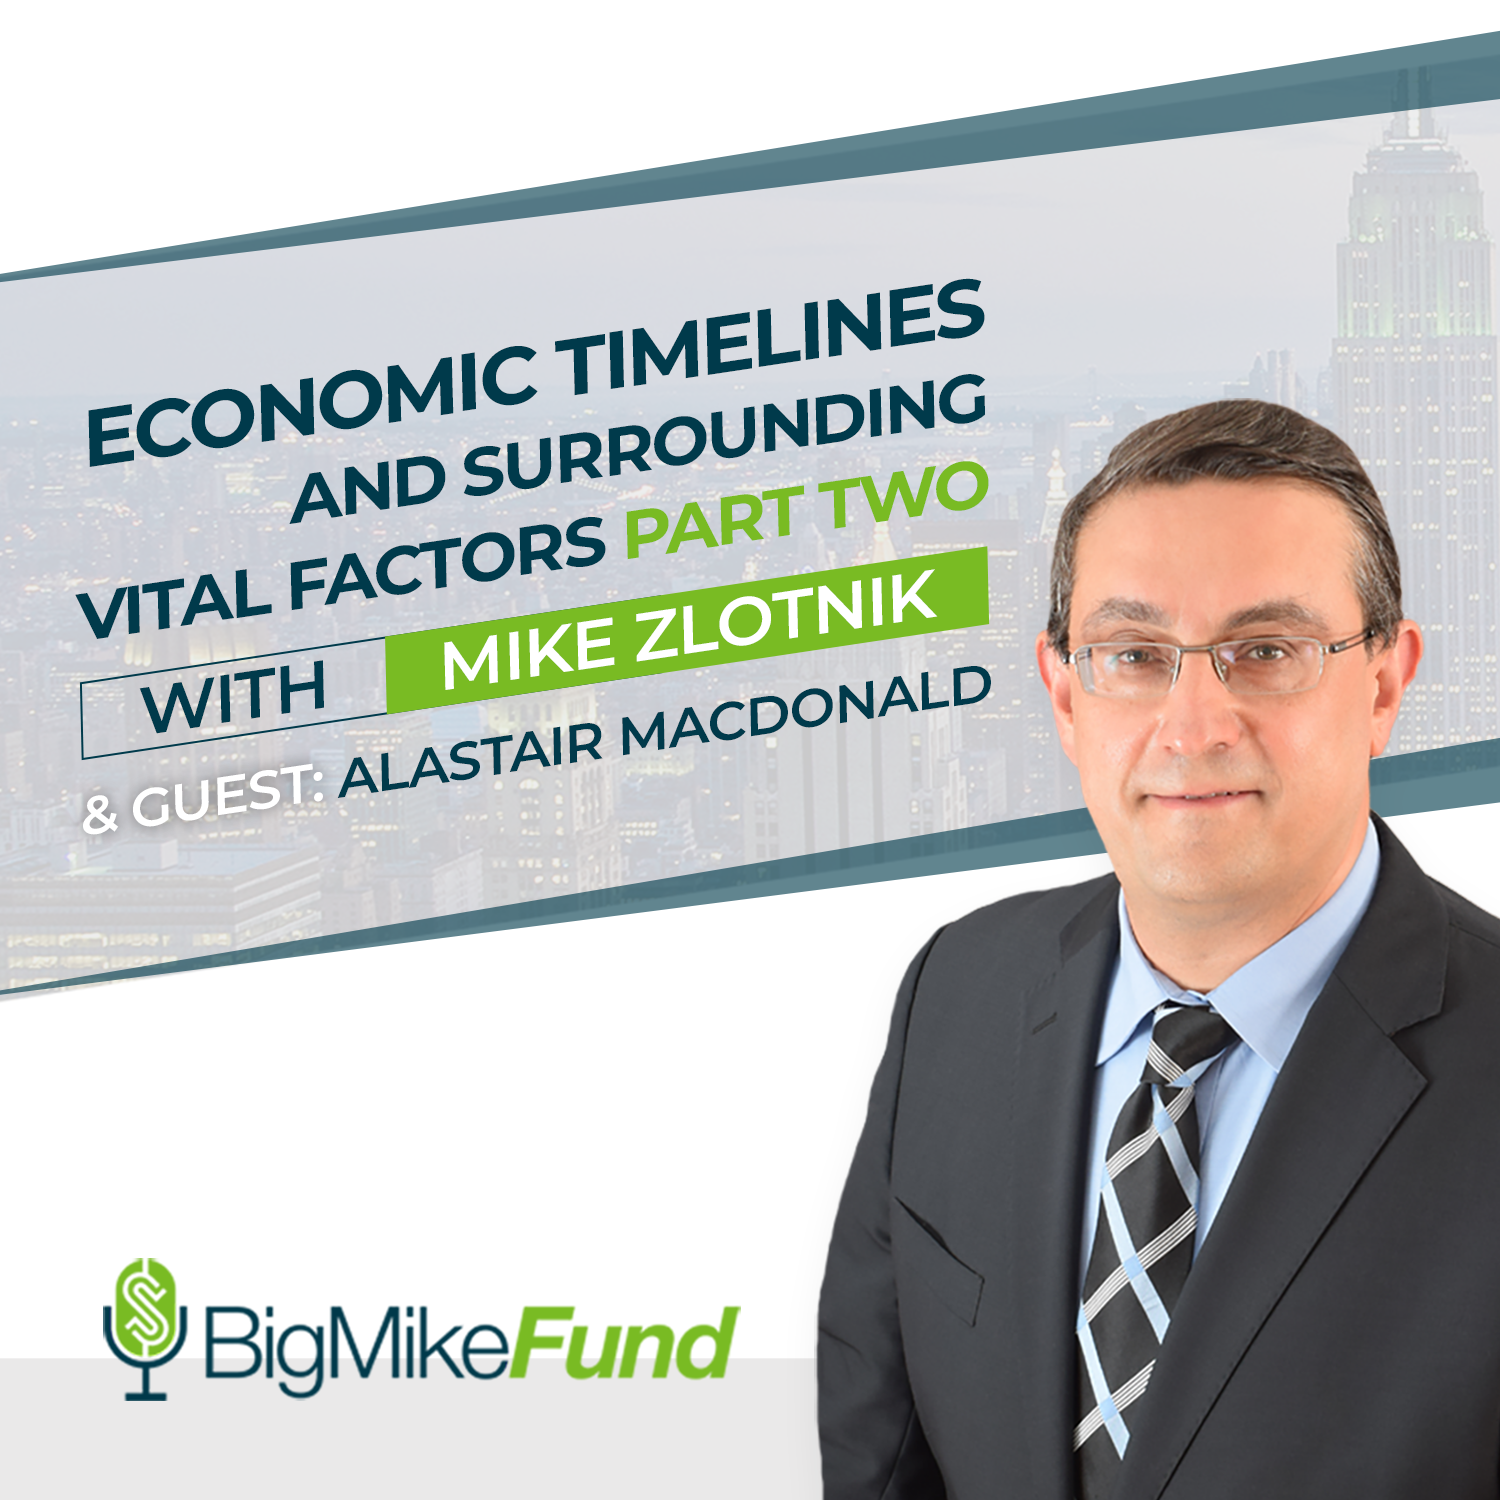 101: Economic Timelines and Surrounding Vital Factors Part Two with Alastair Macdonald